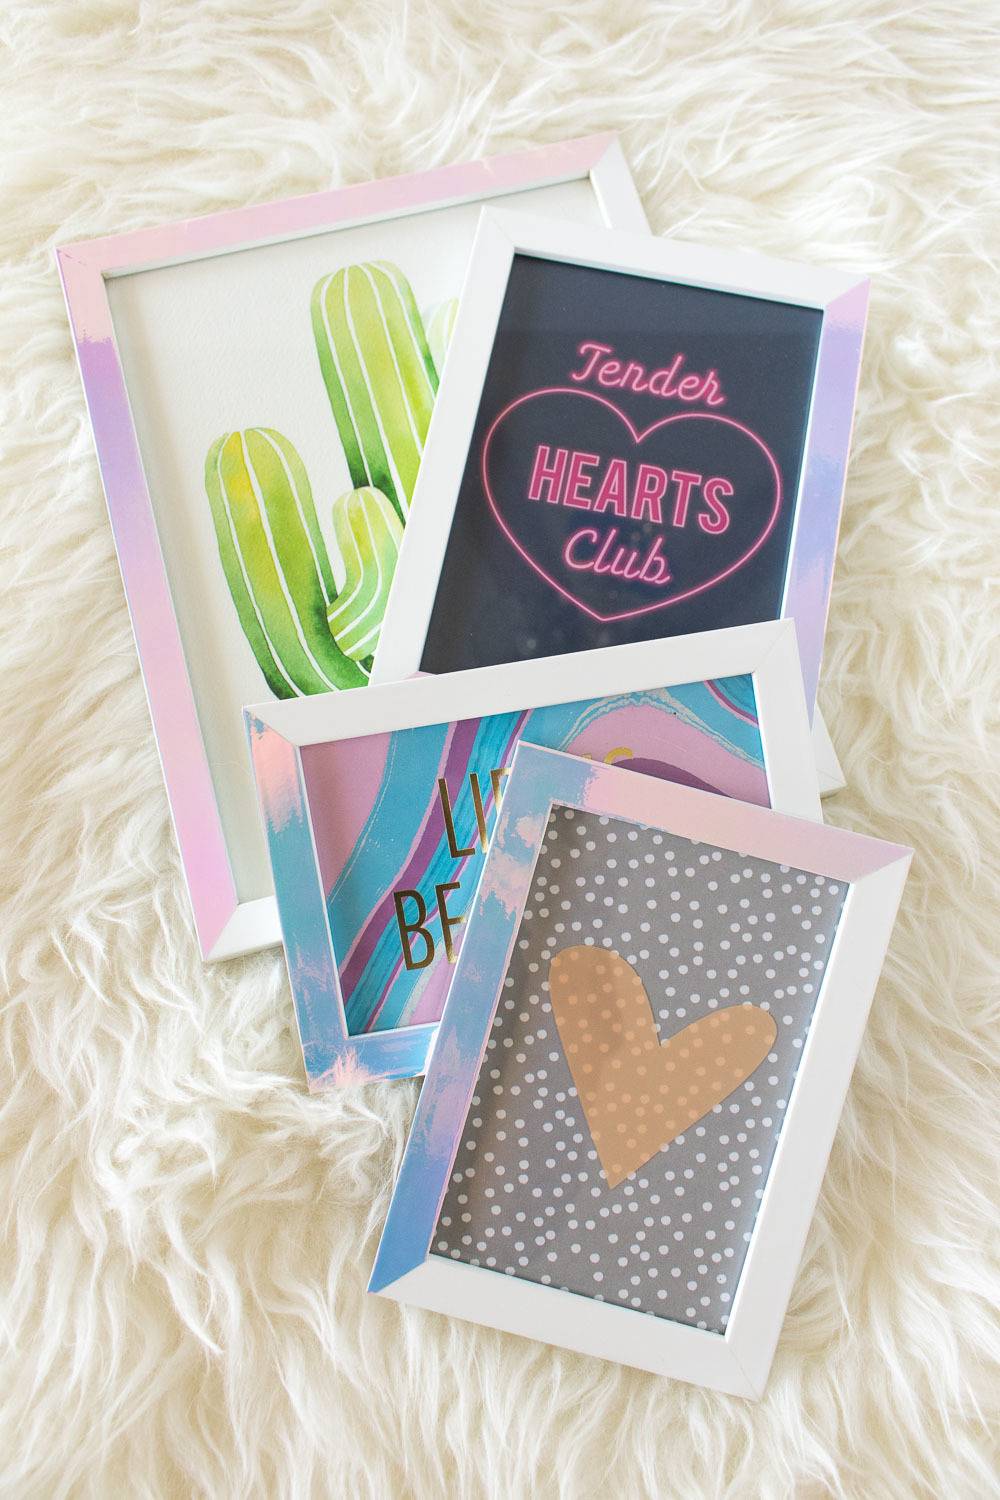 Picture frame makeover ideas - Photo via Club Crafted